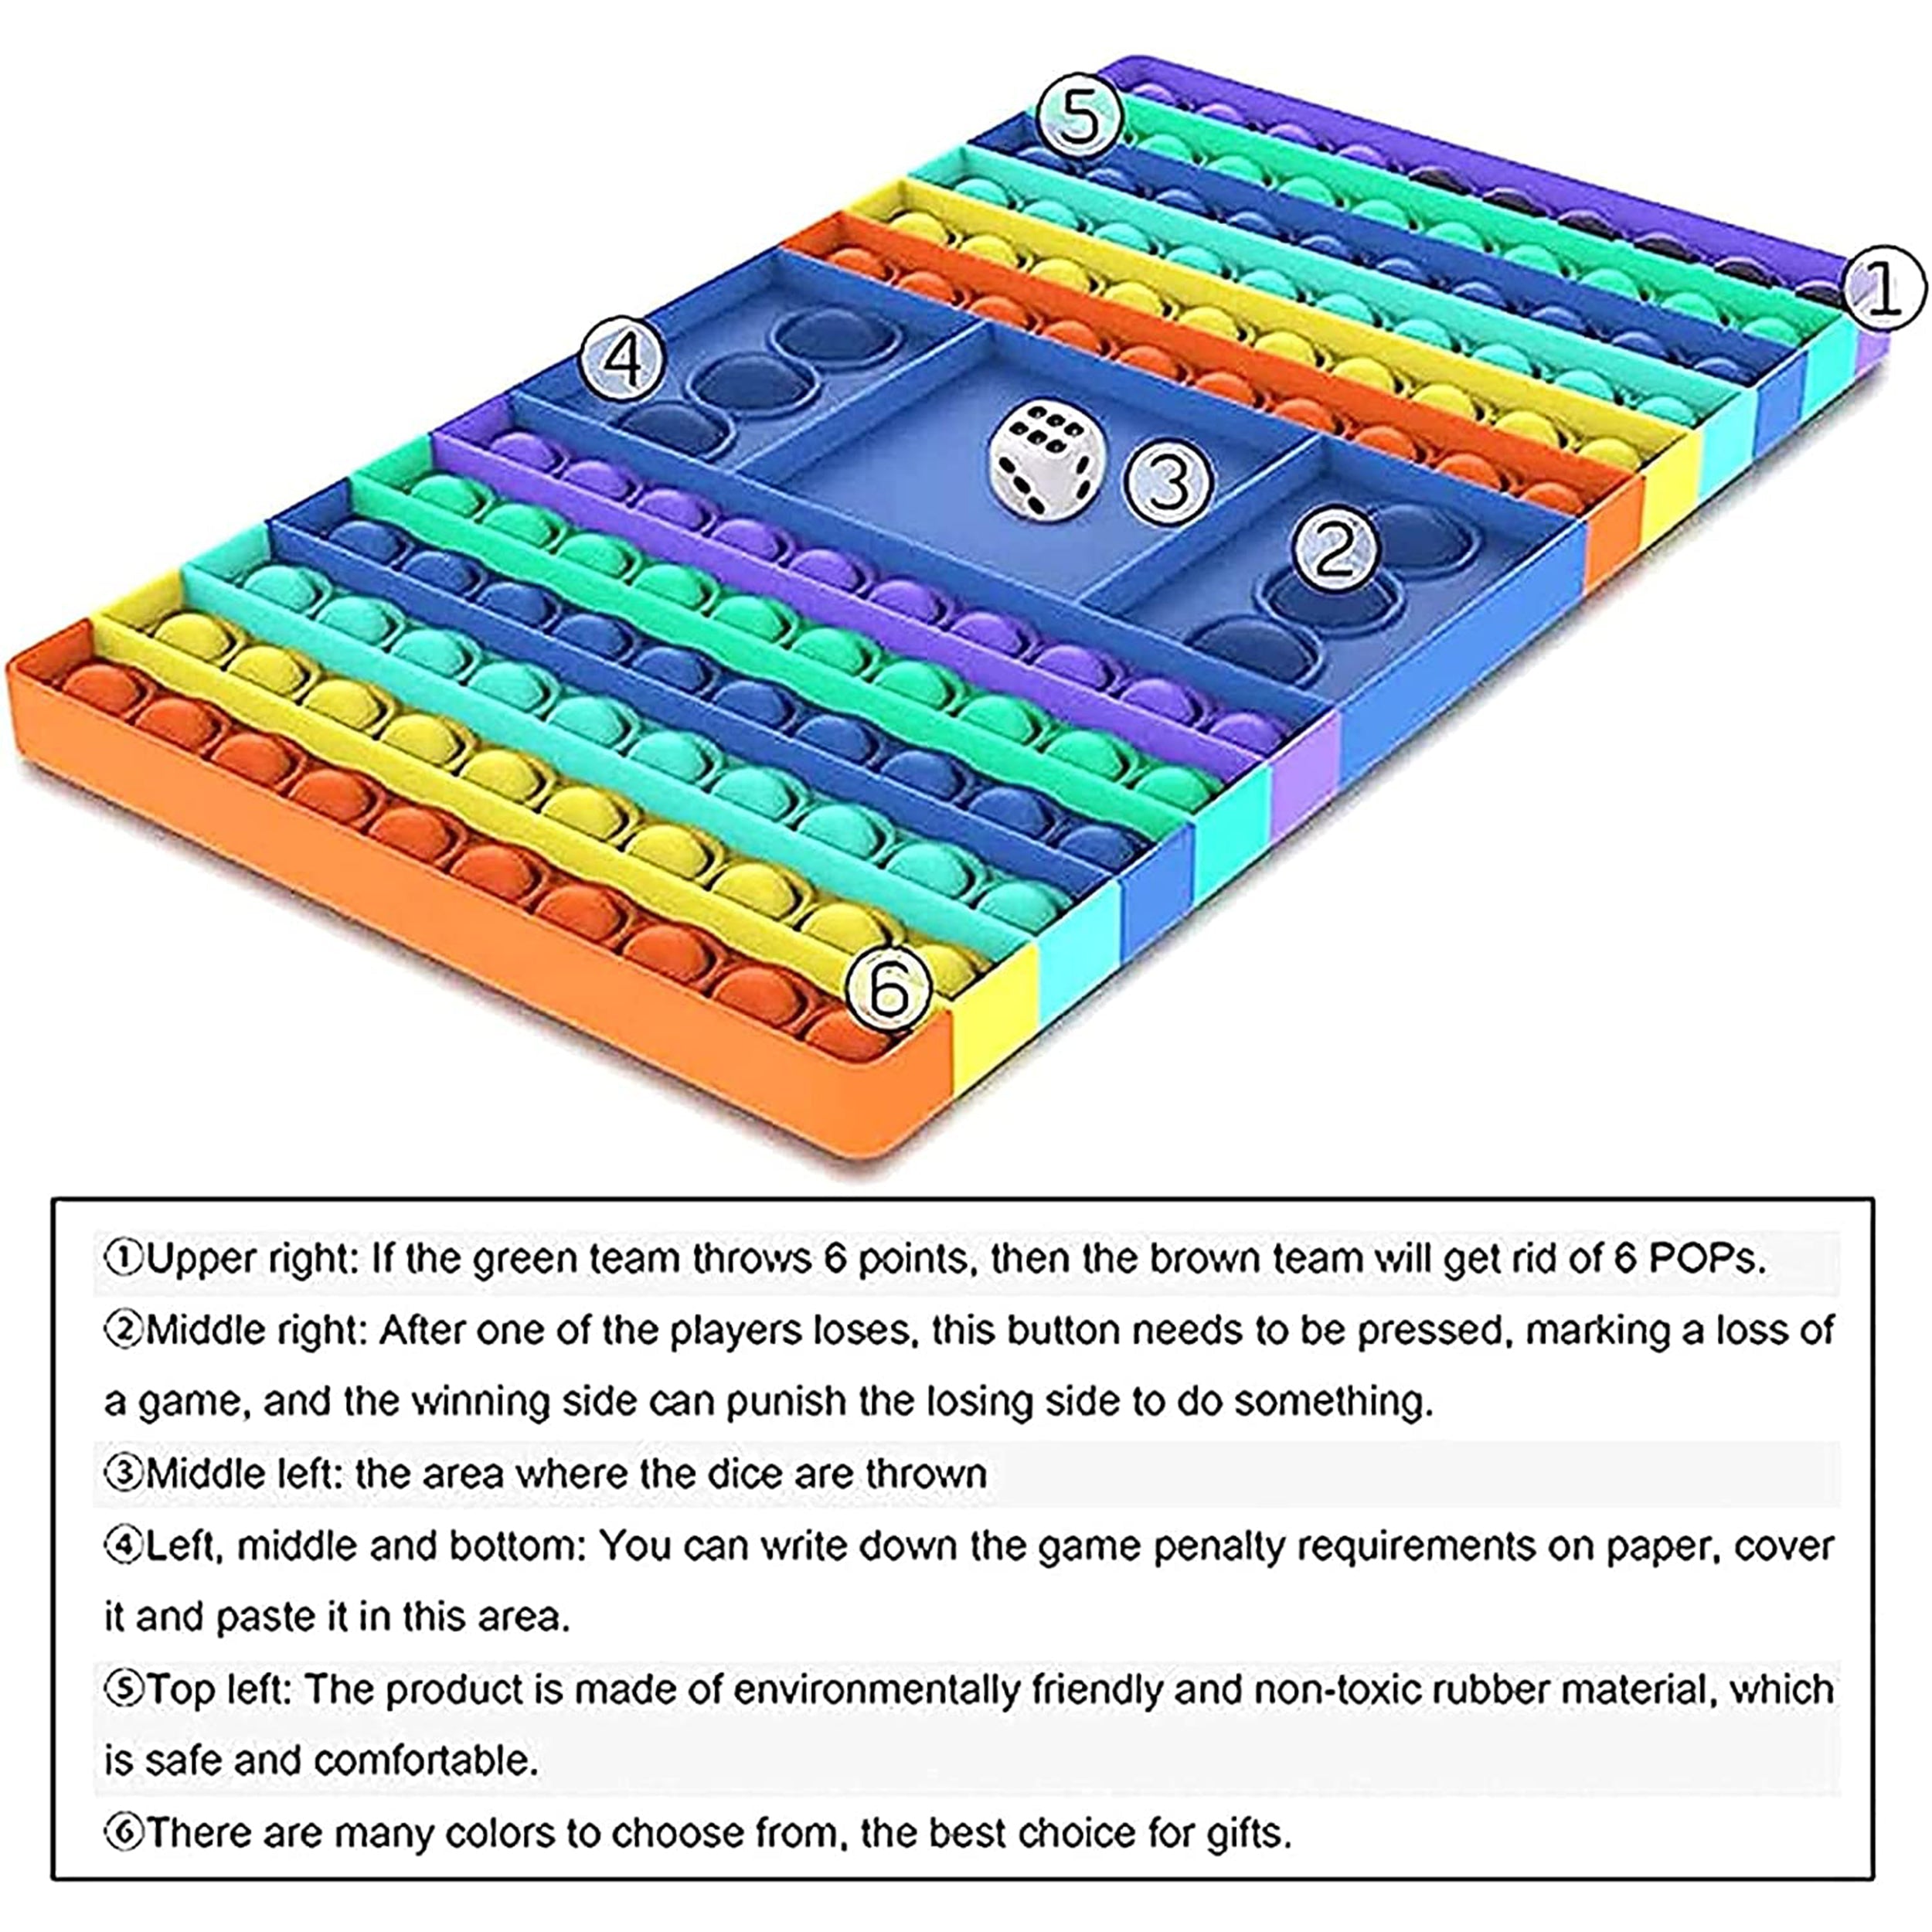 How to play with Rainbow chess board pop it fidget toys